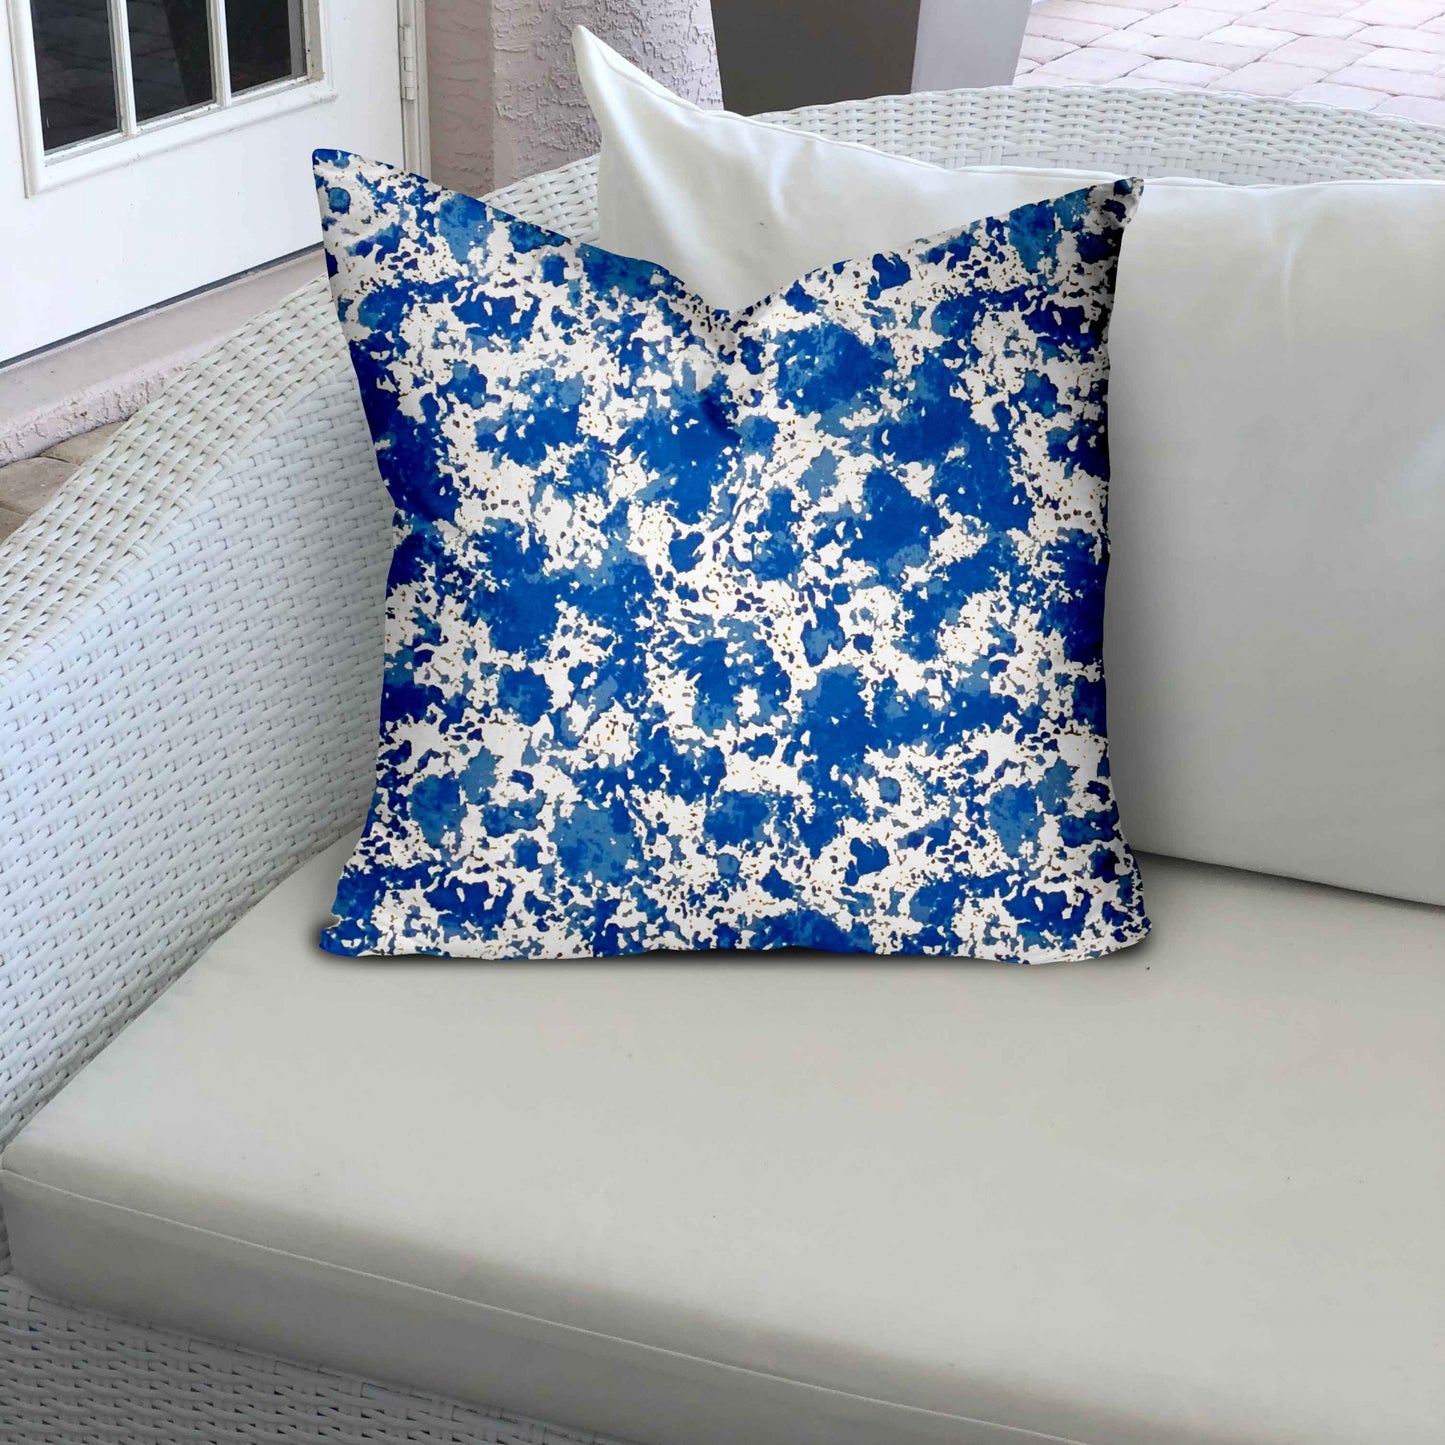 22" X 22" Blue And White Zippered Coastal Throw Indoor Outdoor Pillow